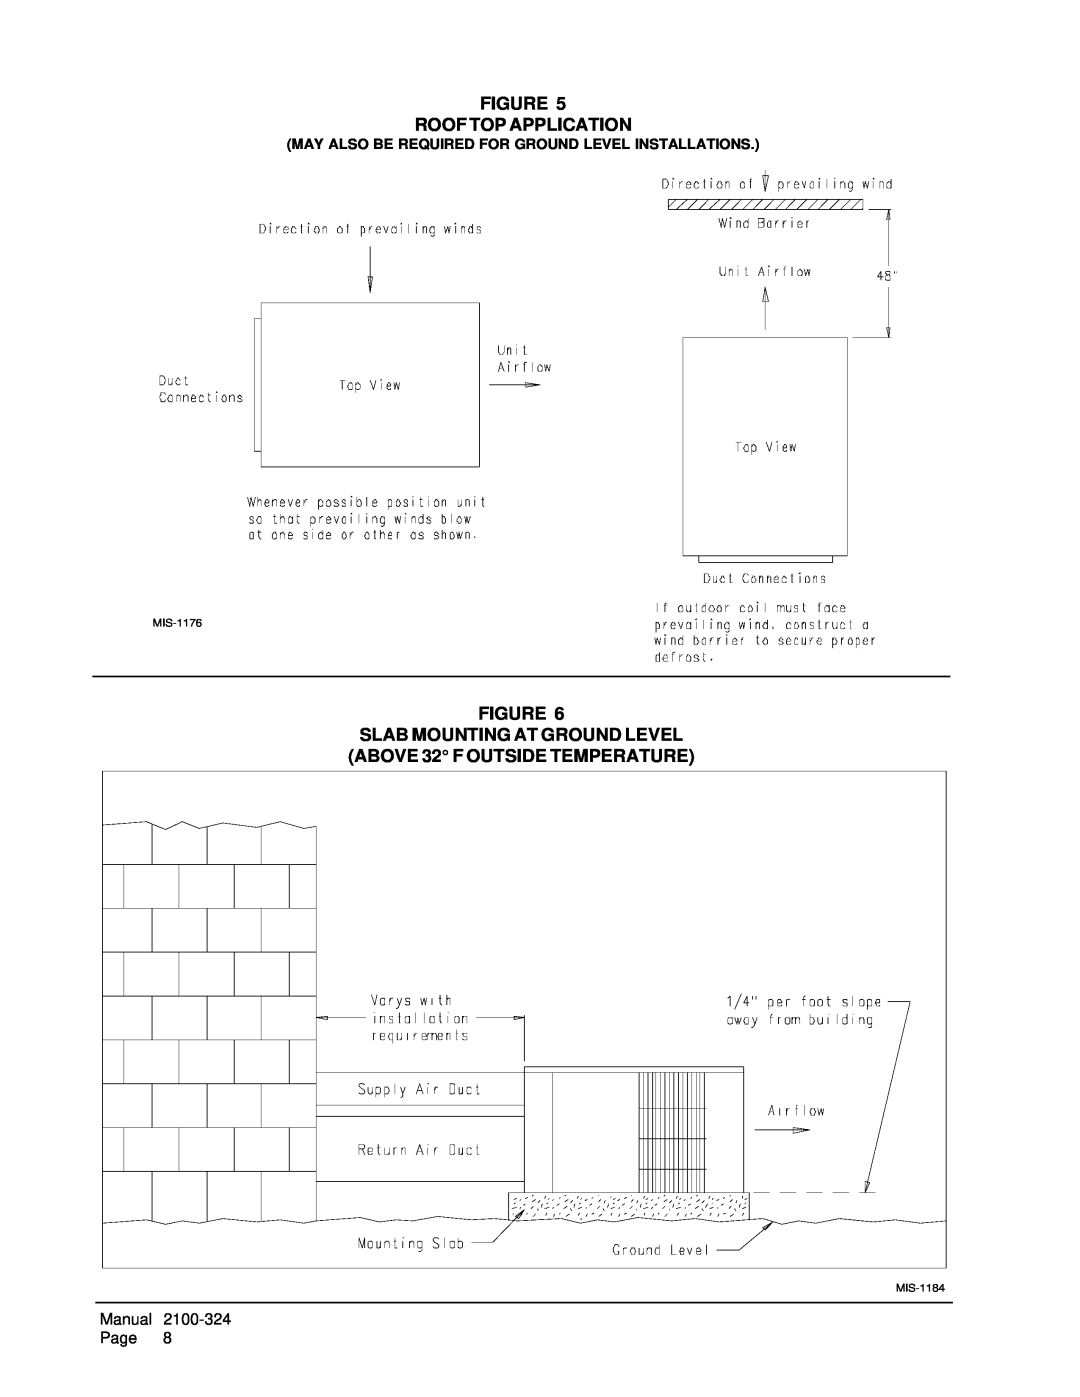 Bard P1142A3, P1148A1, P1060A1 installation instructions Figure Roof Top Application, MIS-1176, MIS-1184 